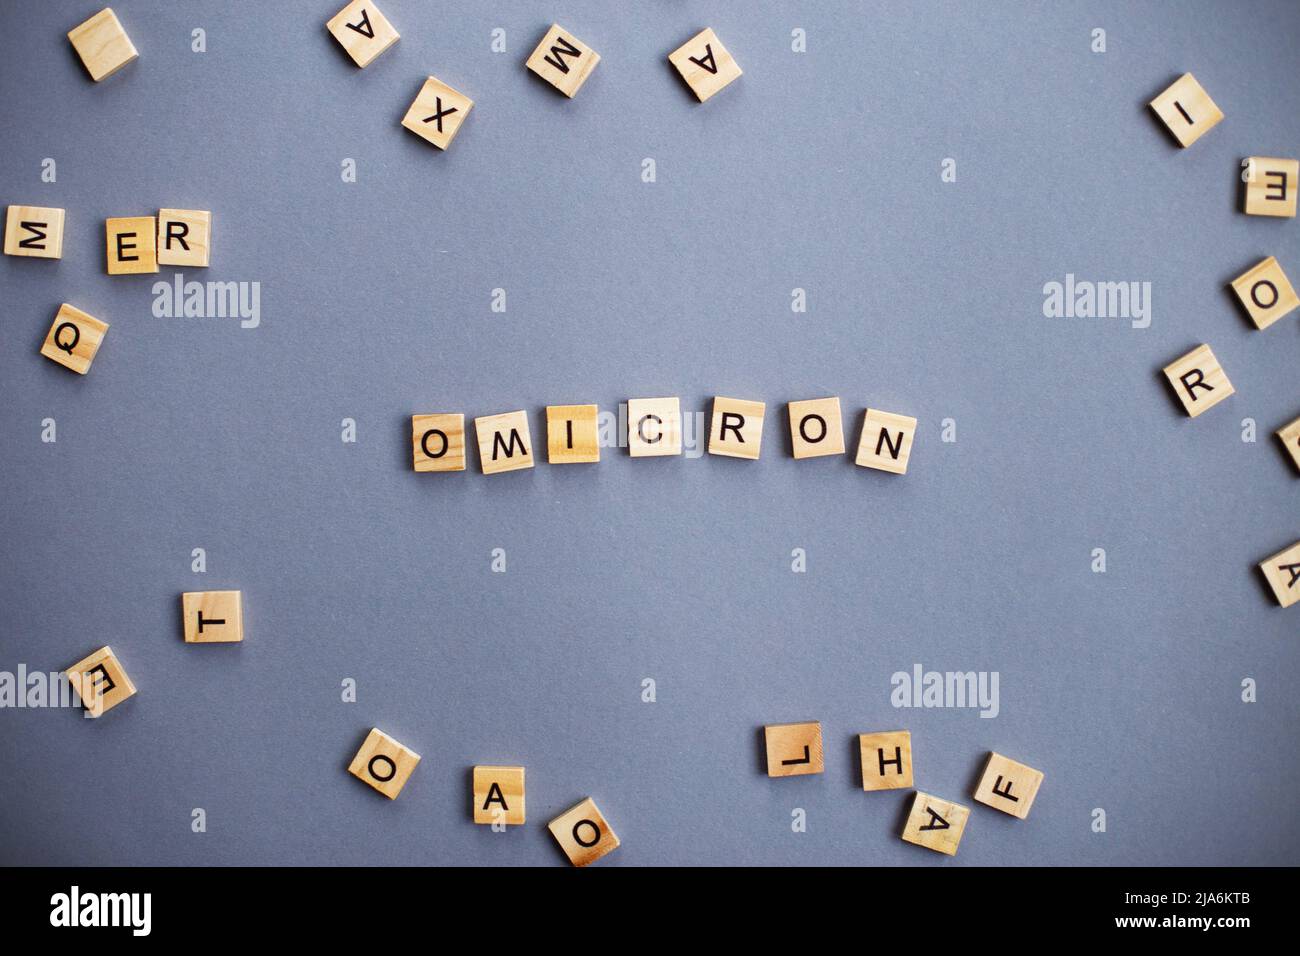 word omicron made by wooden blocks on gray background Stock Photo